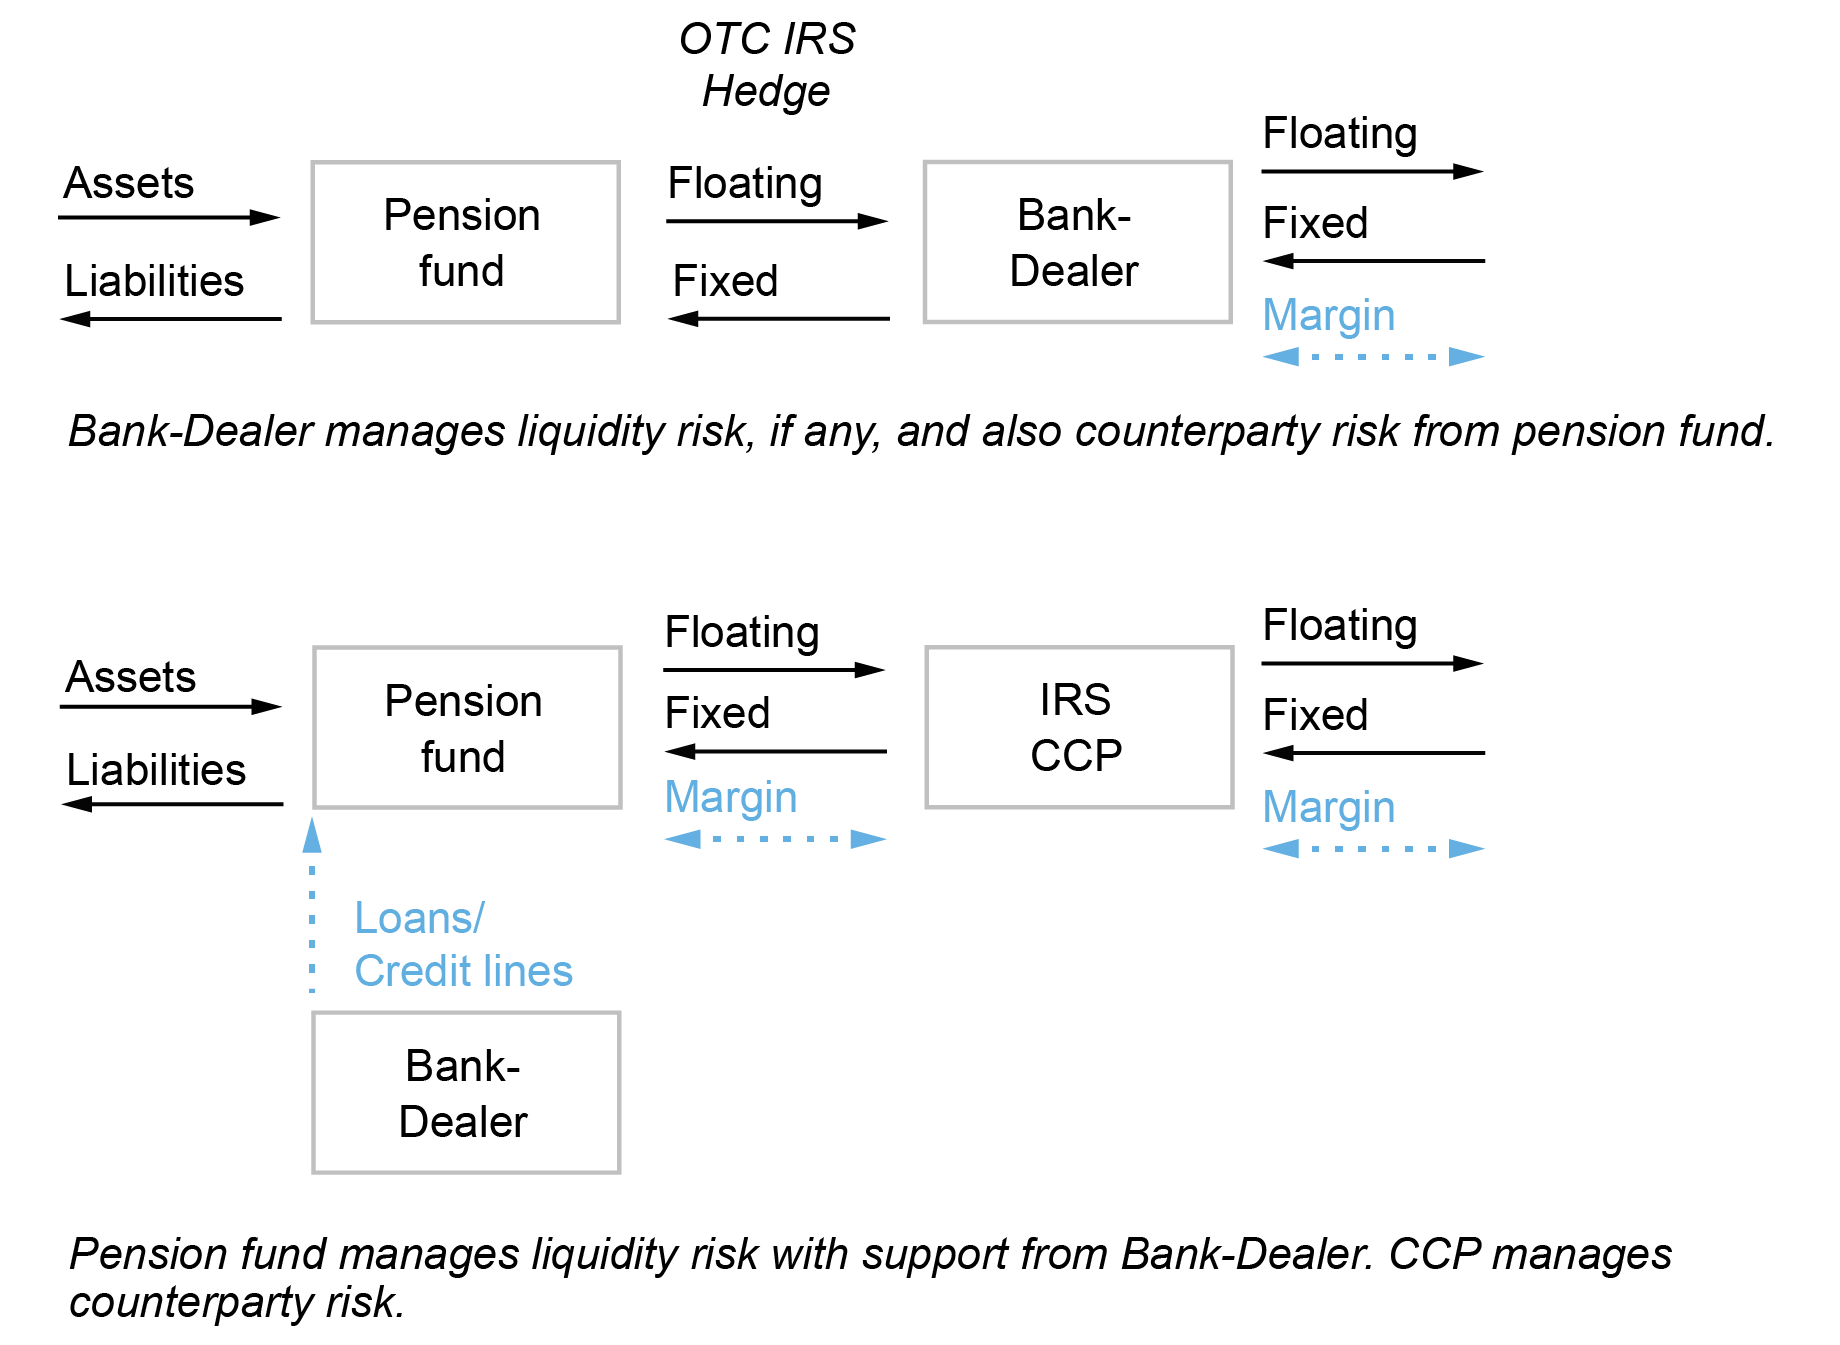 Alt=”flow chart showing another example of the bank/NBFI transformation; top chart shows how, previously, the bank-dealer bore counterparty risk and potential liquidity risk for the U.K. pension fund; the bottom chart shows the pension fund with a bilateral interest-rate swap (IRS) cleared against a central counterparty (CCP) to cover counterparty risk, with a bank-dealer engaged to make loans to cover margins and provide credit lines” 